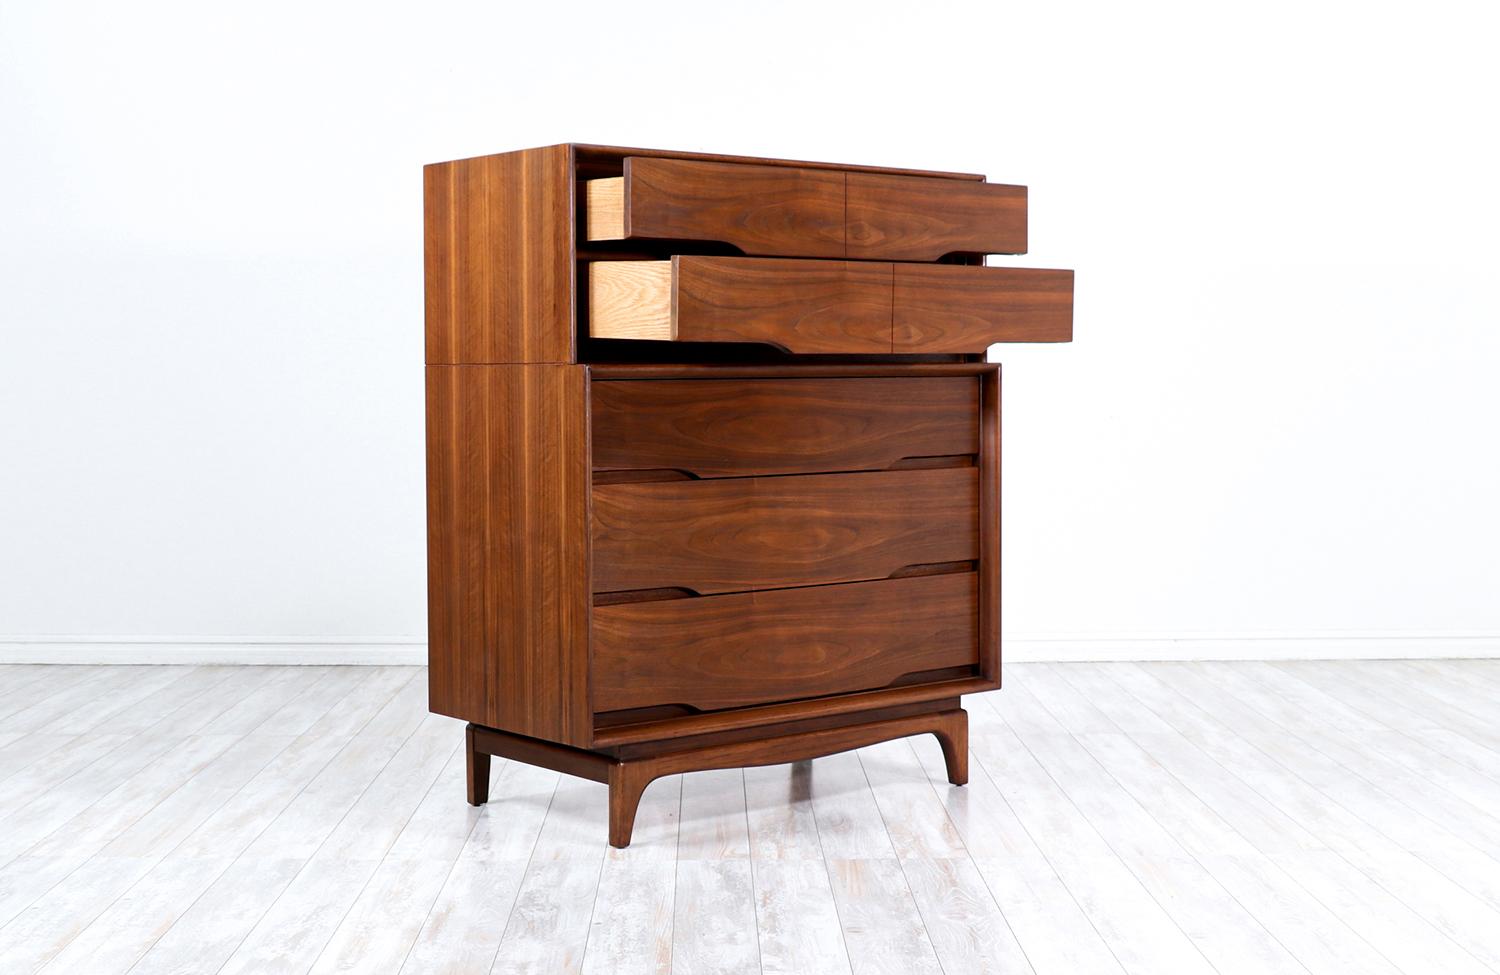 American Mid-Century Modern Sculpted Walnut Chest of Drawers